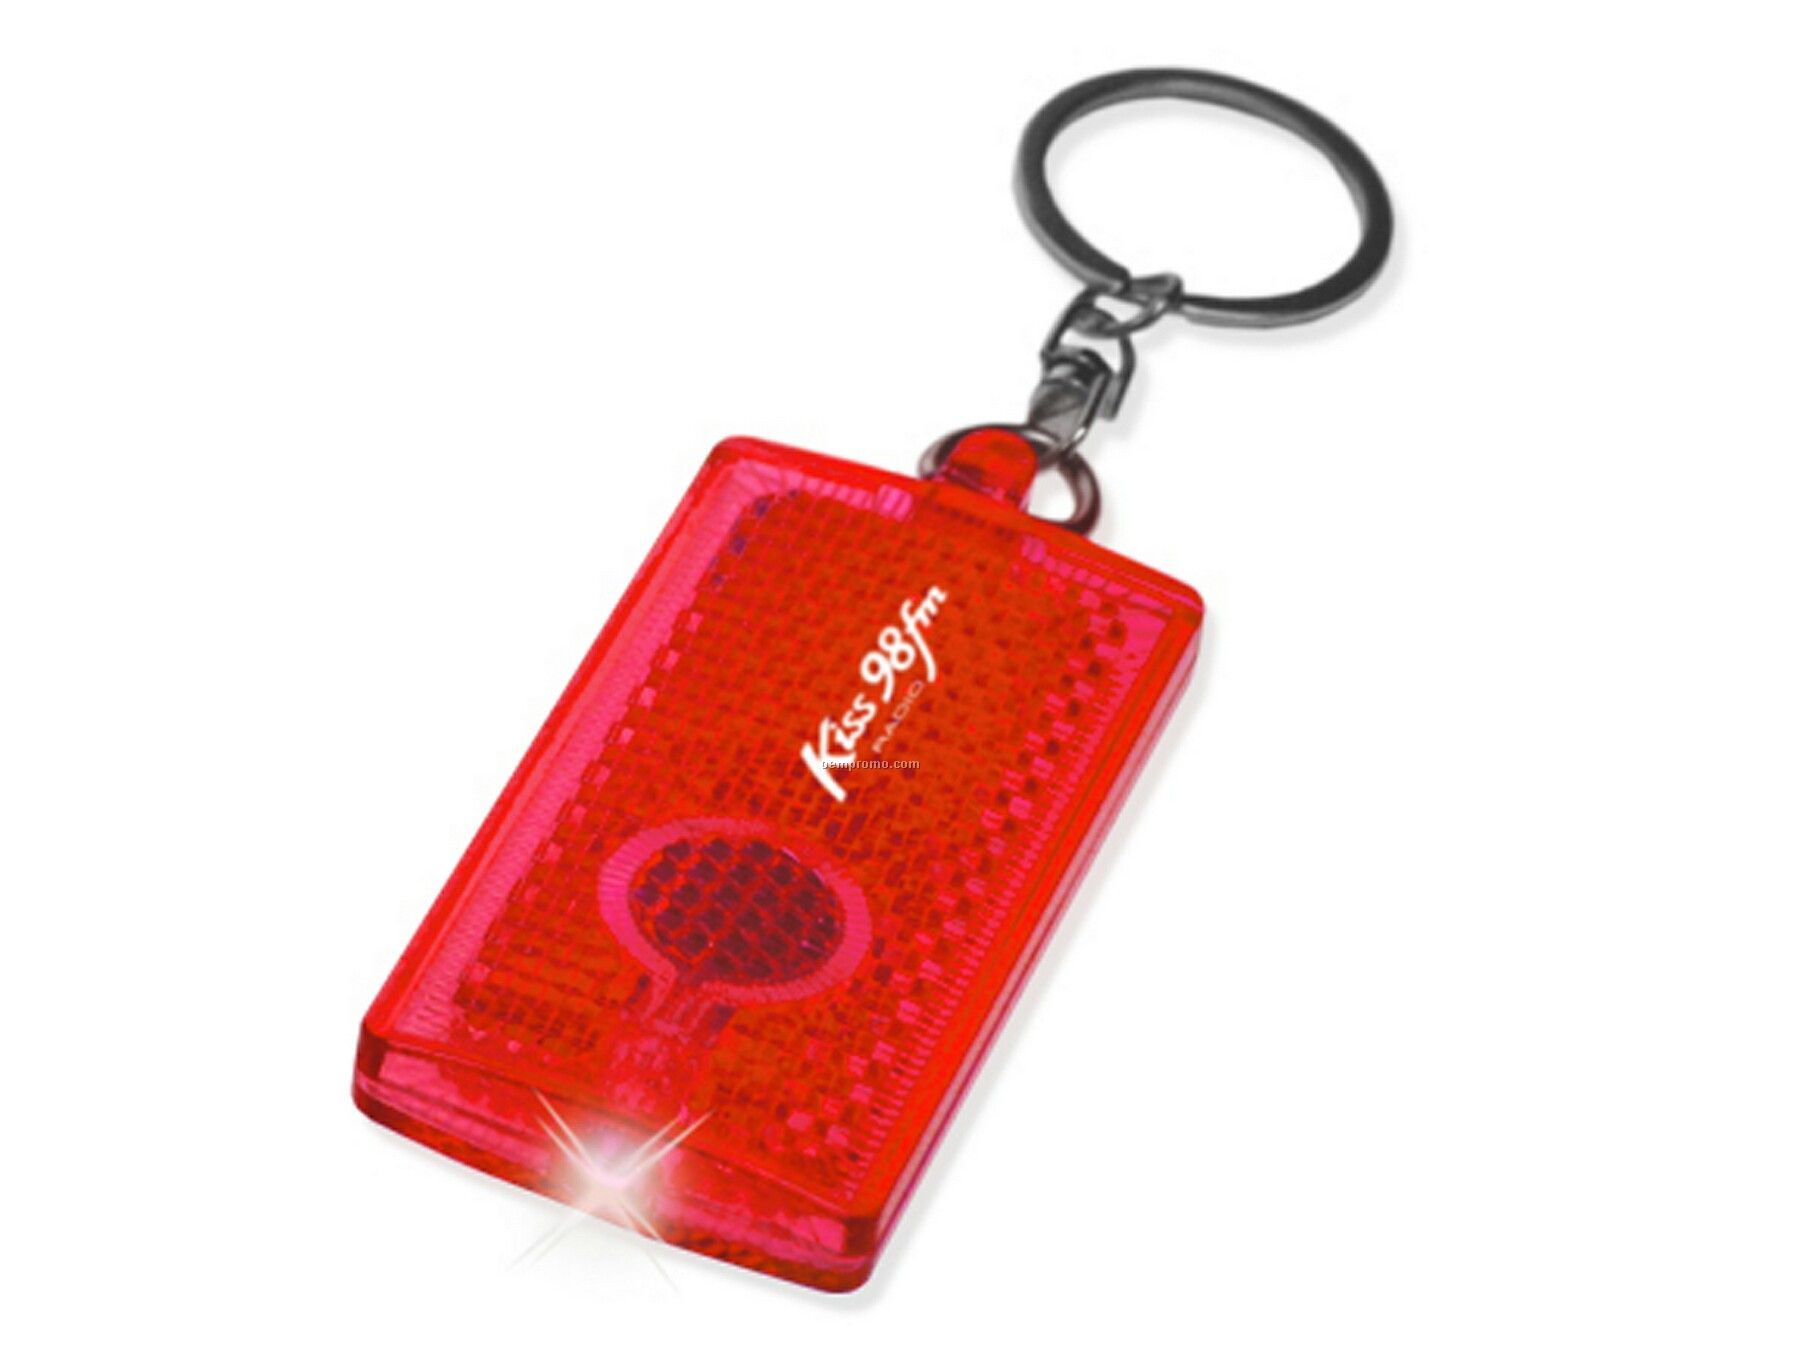 Prismatic Keychain Light In Cherry Red With White LED